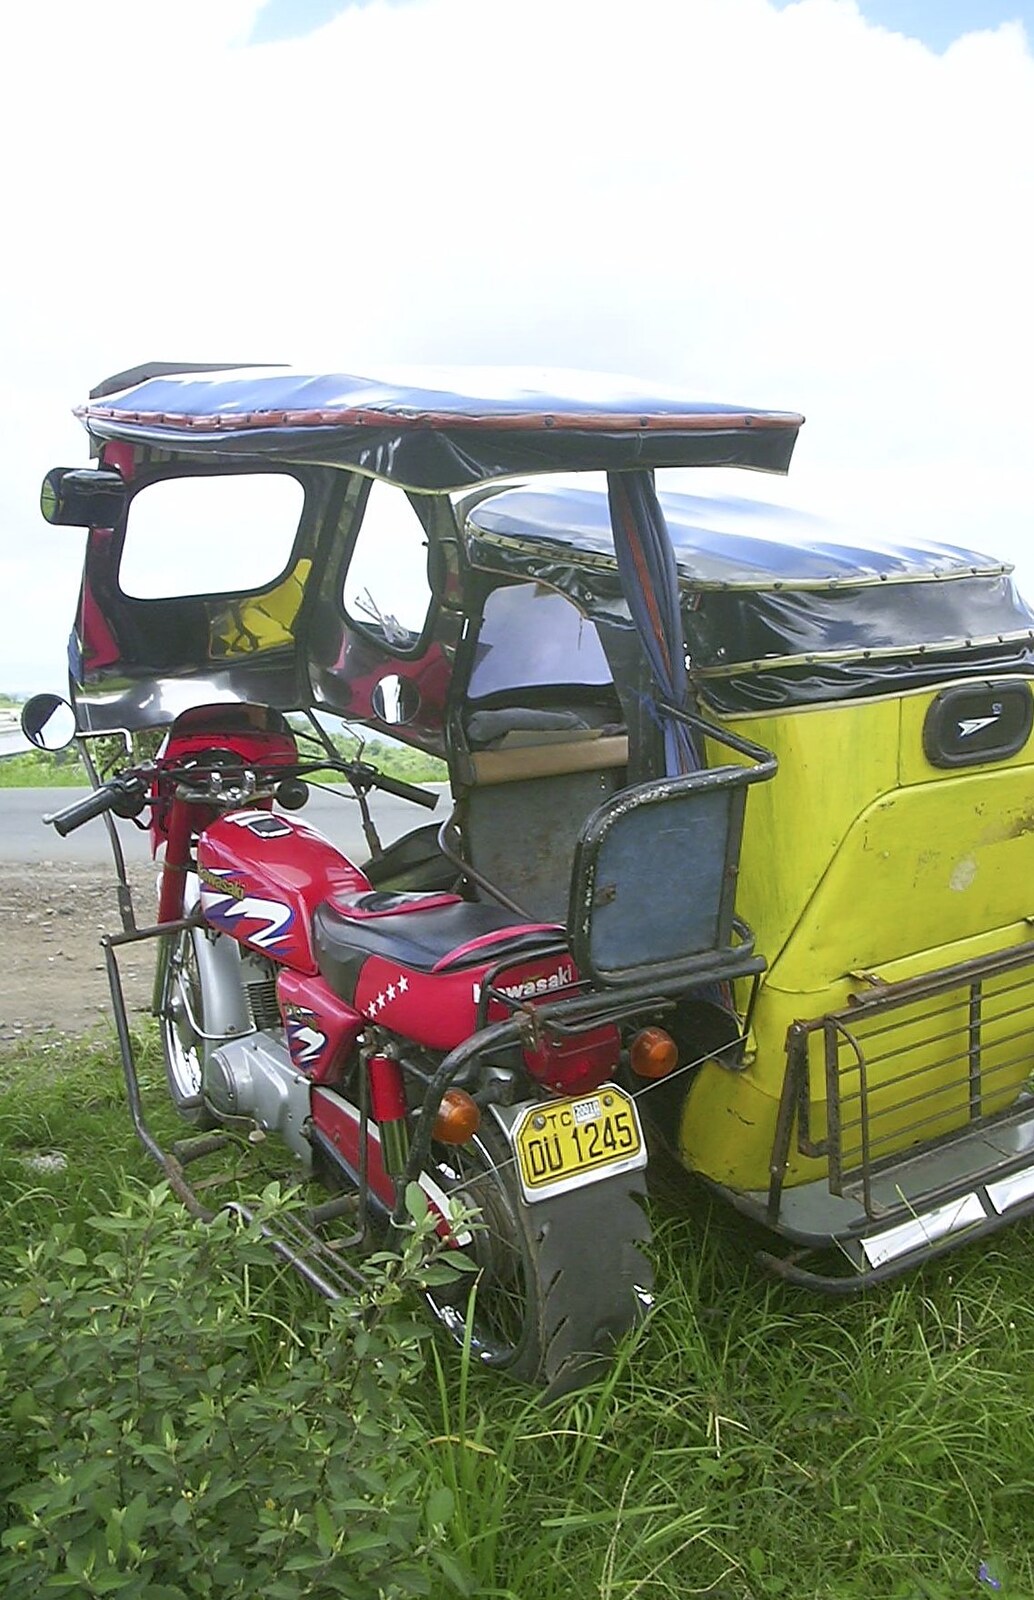 An abandoned-looking motorbike and sidecar from A Postcard From Manila: a Working Trip, Philippines - 9th July 2004